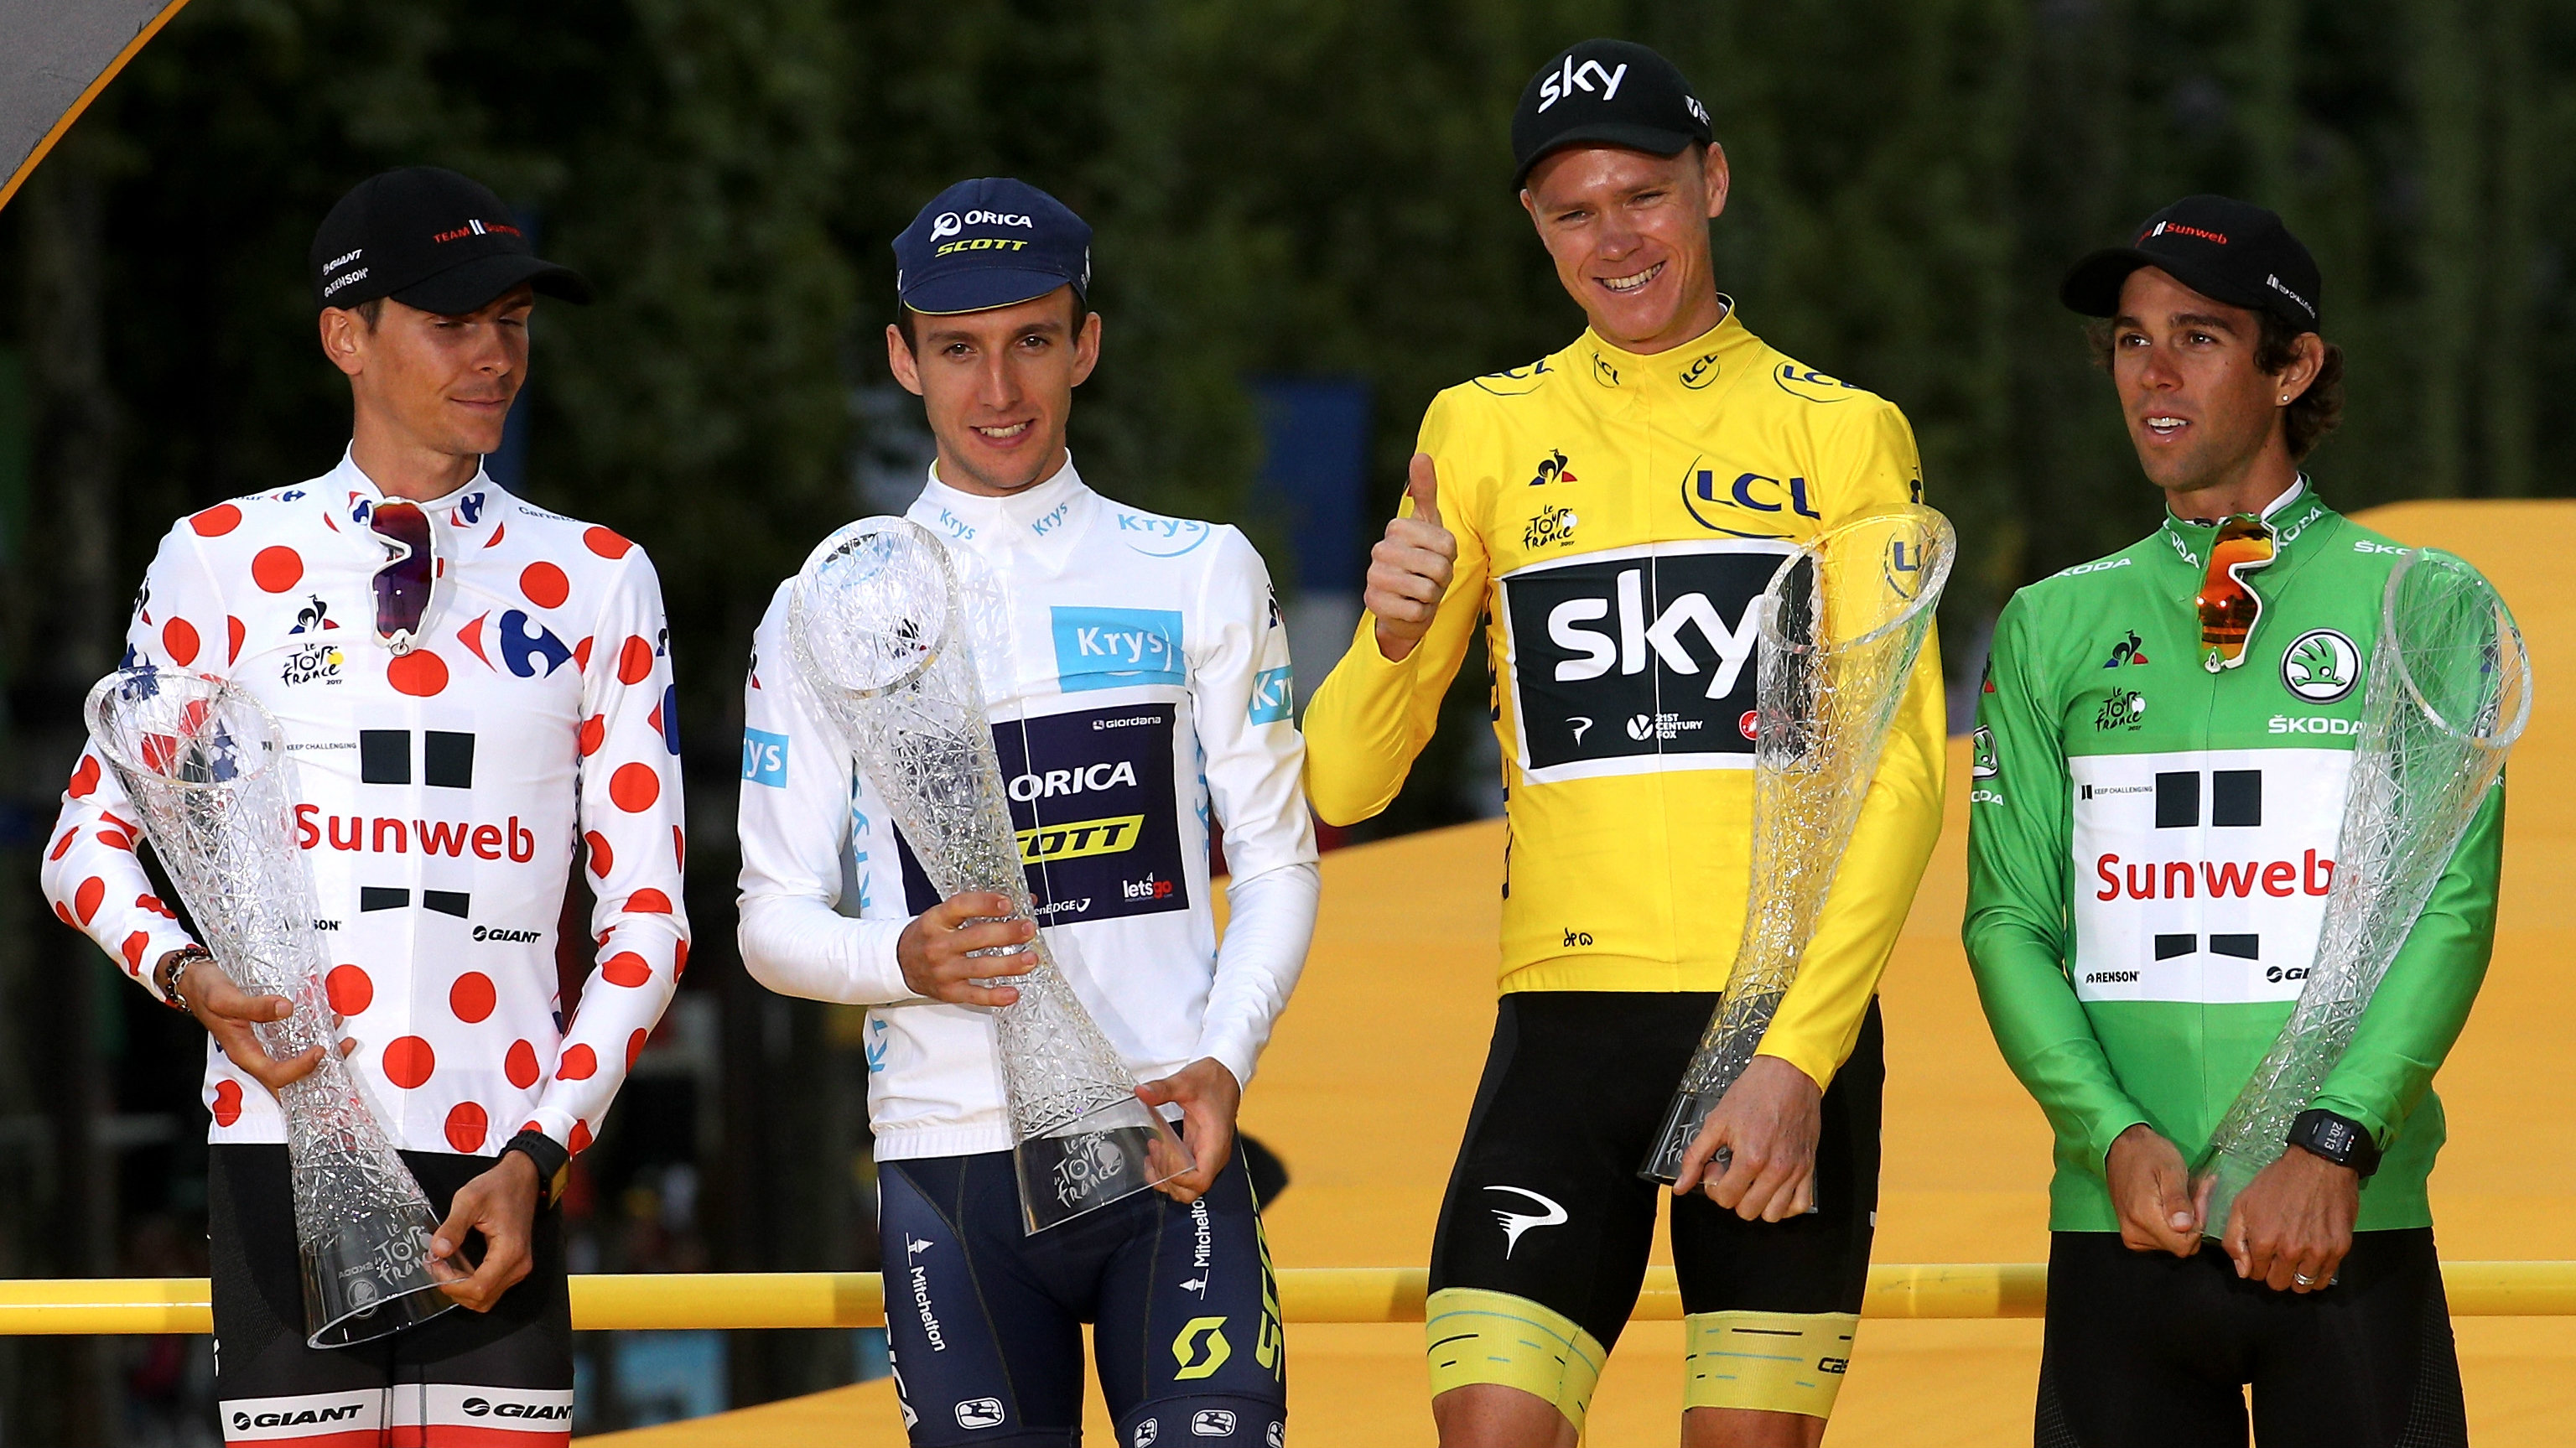 Tour de France 2018 prize money How much will riders earn? Sporting News